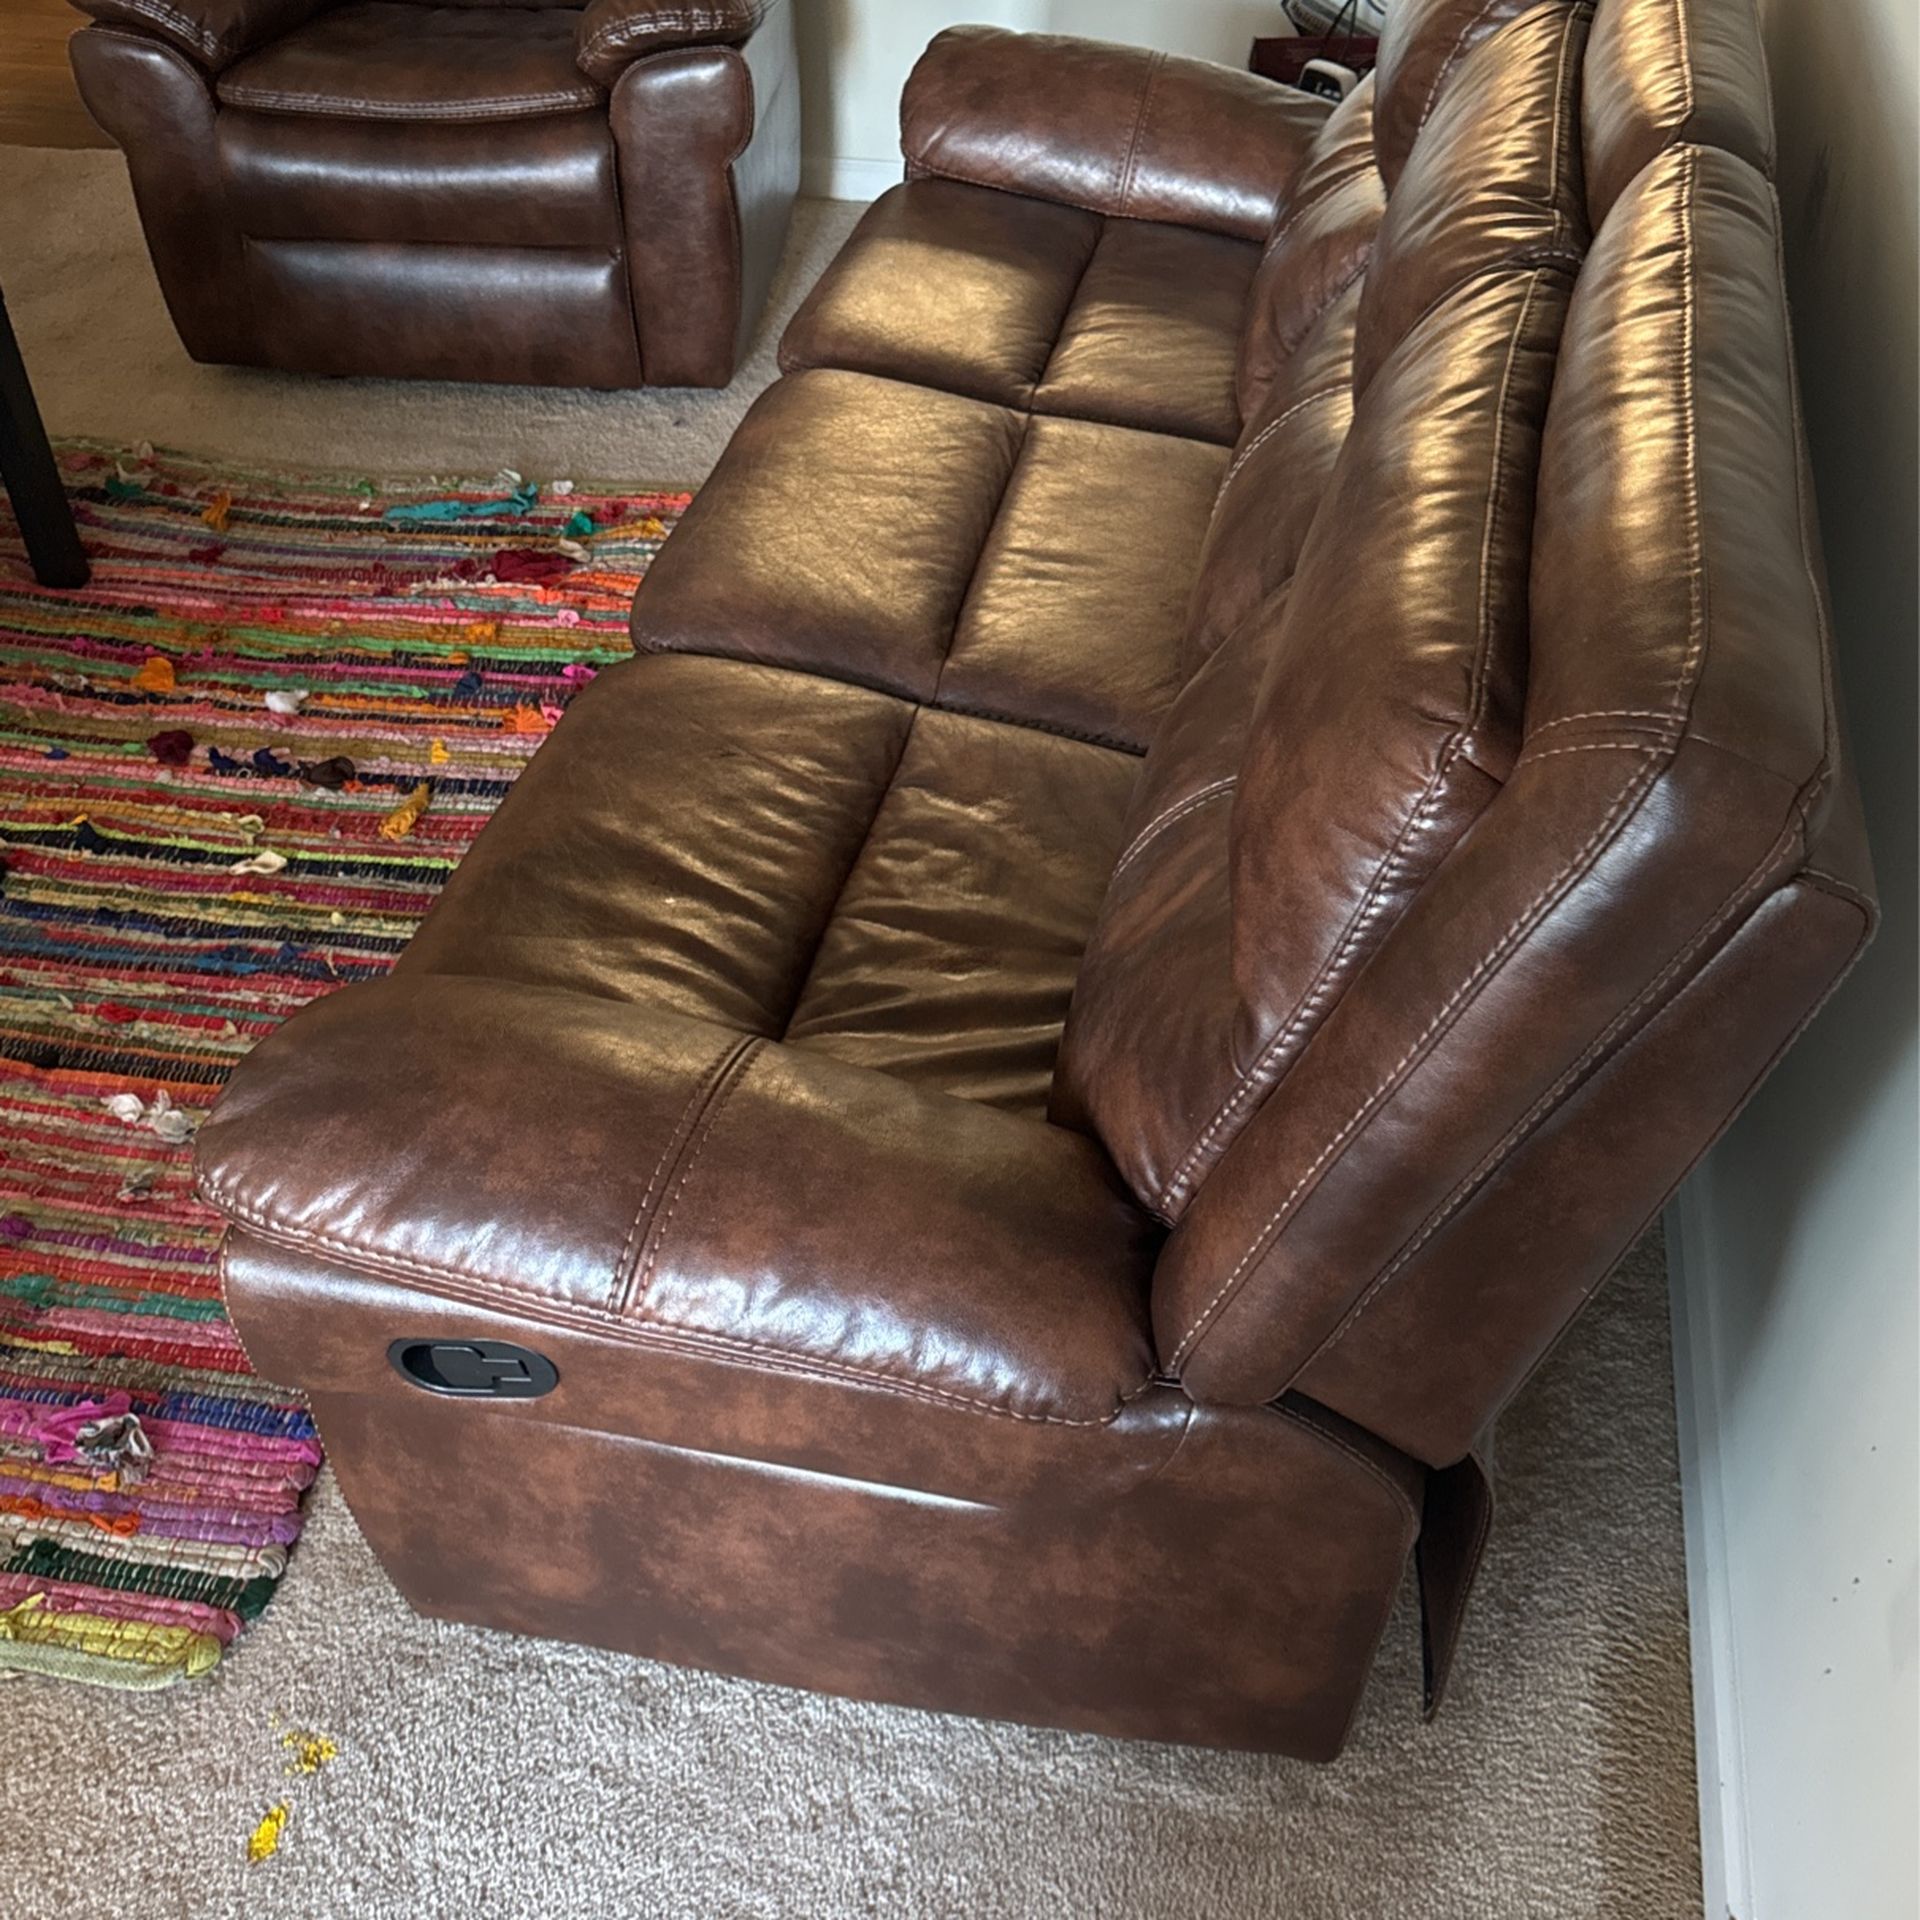 Brown leather Sofa And Recliner Chair